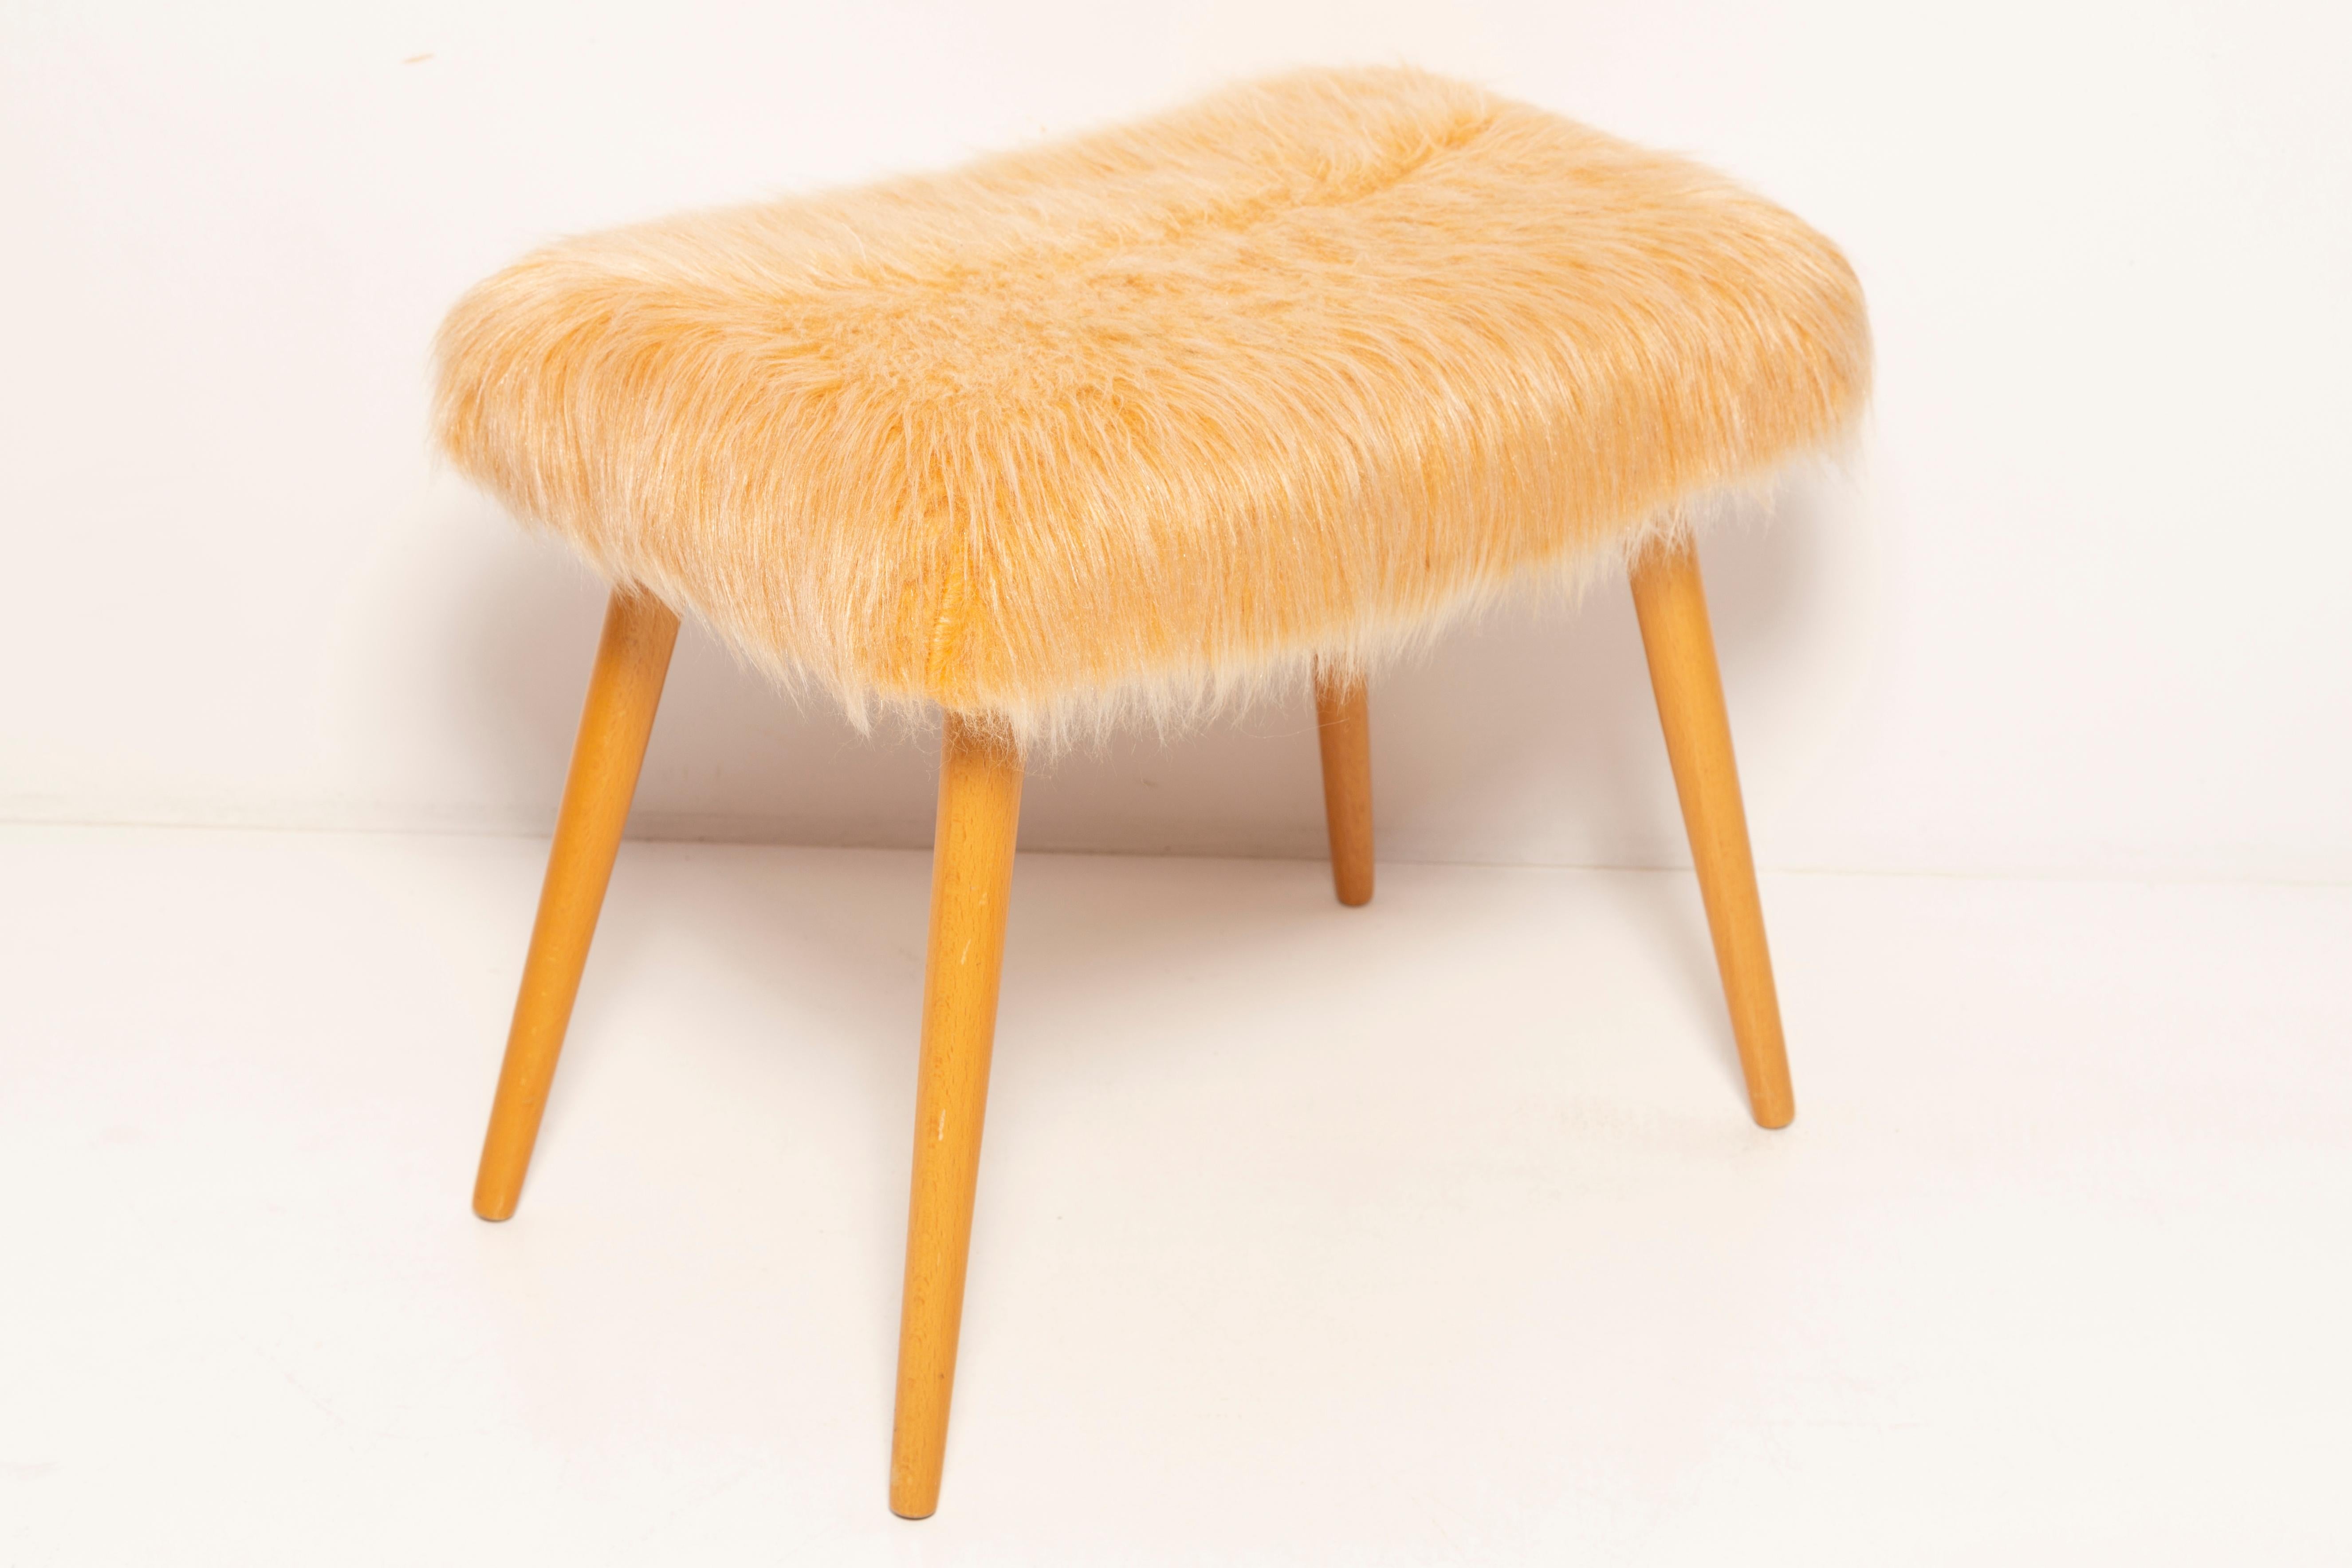 Stool from the turn of the 1960s. Beautiful high quality faux fur. The stool consists of an upholstered part, a seat and wooden legs narrowing downwards, characteristic of the 1960s style. They are in good original vintage condition.
Only one unique